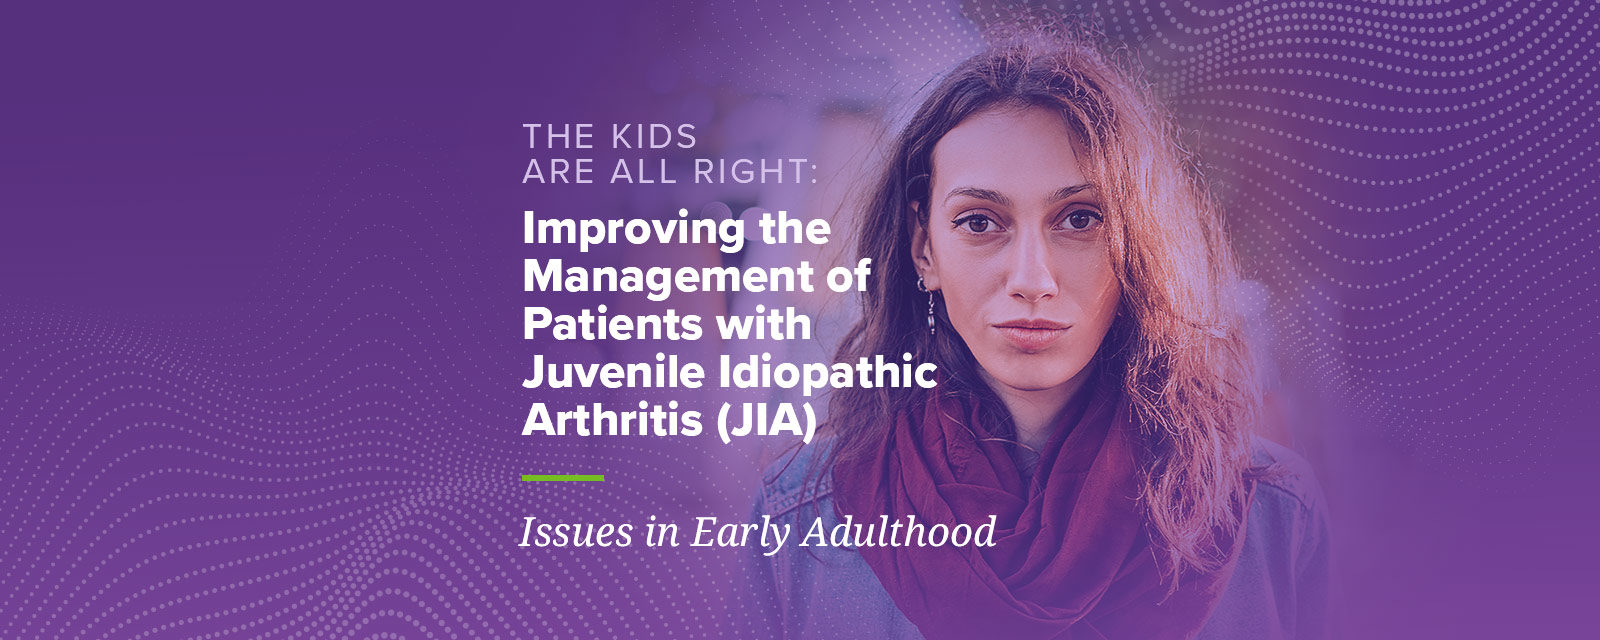 The Kids Are All Right: Improving the Management of Patients with Juvenile Idiopathic Arthritis Issues in Early Adulthood